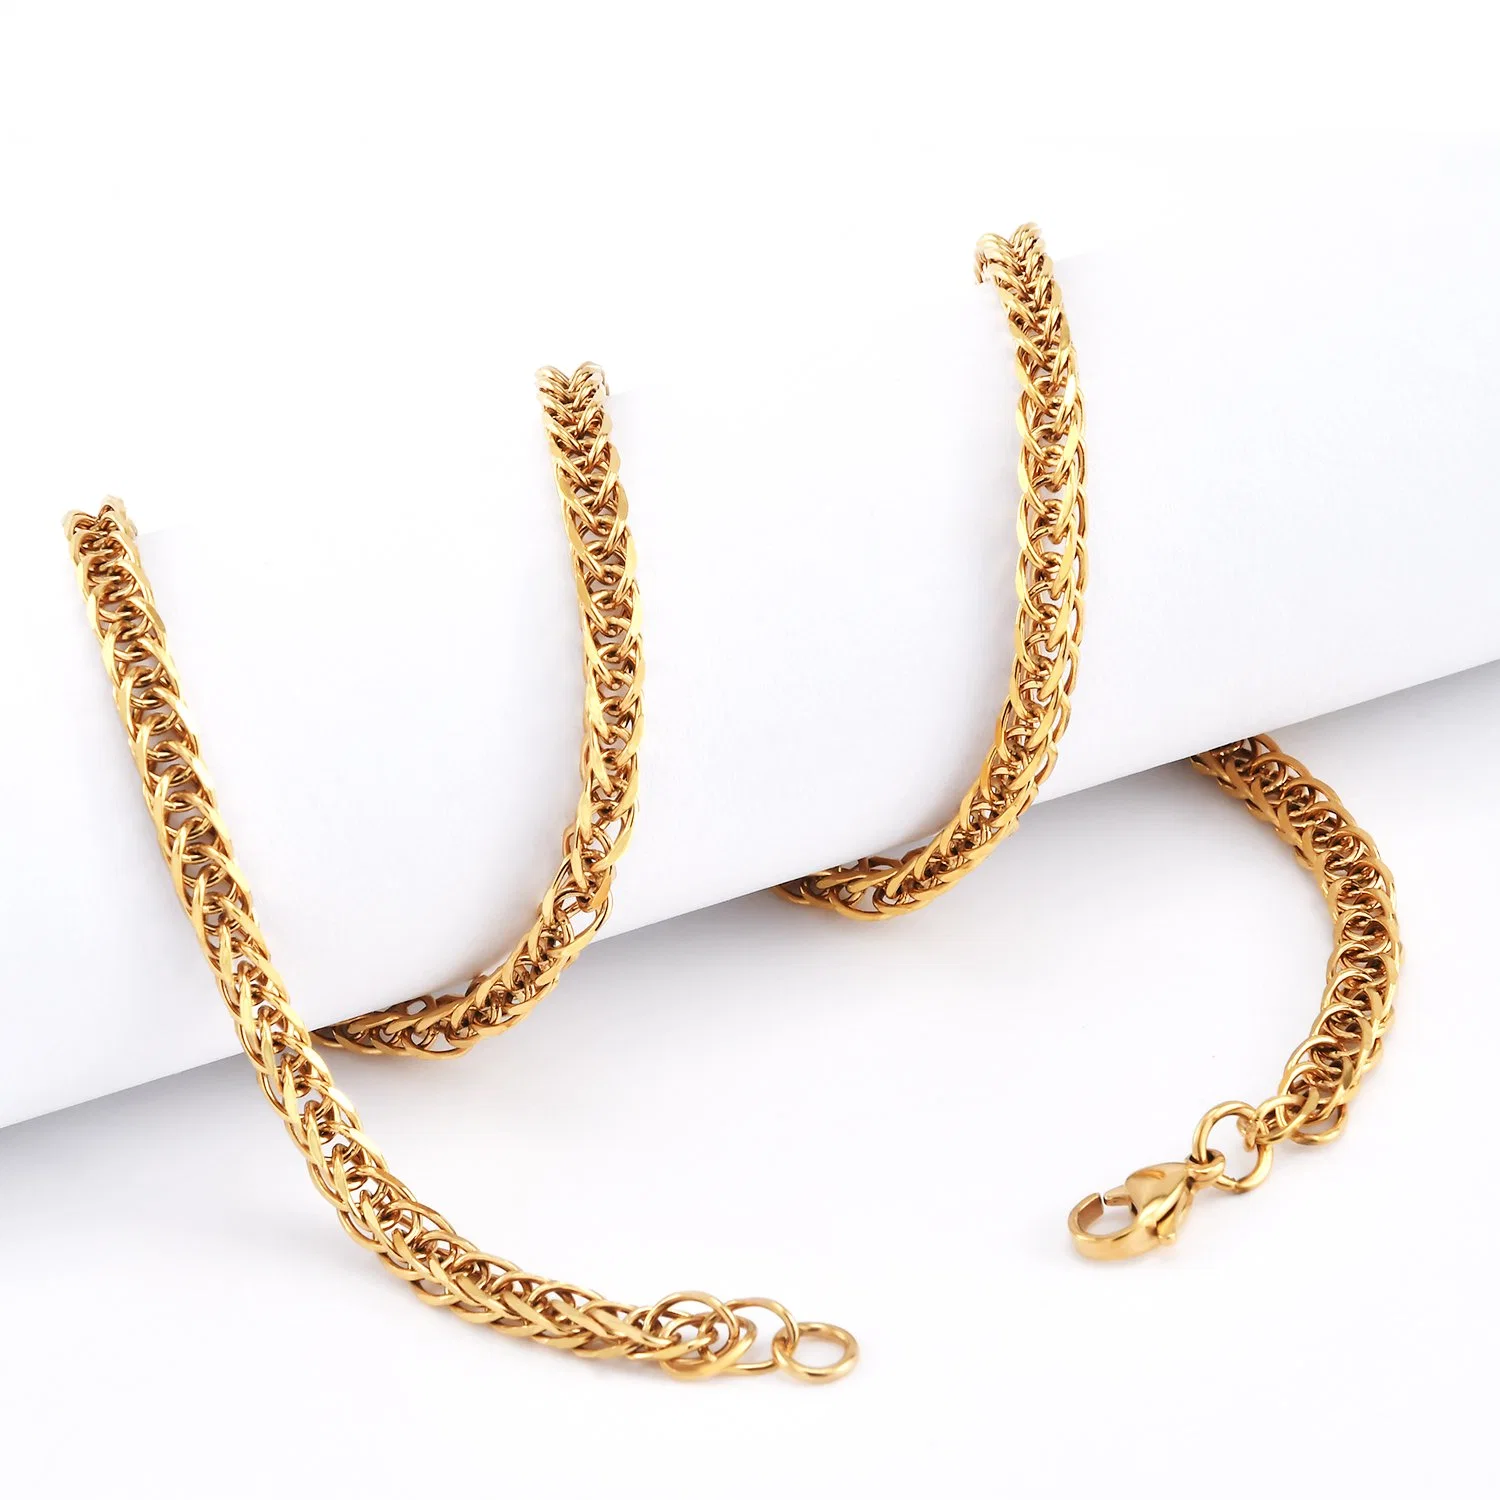 Hot Sale Chopin Chain Necklace Bangle Jewelry Fashion Craft Design Stainless Steel Gold Plated for Fashion Accessories